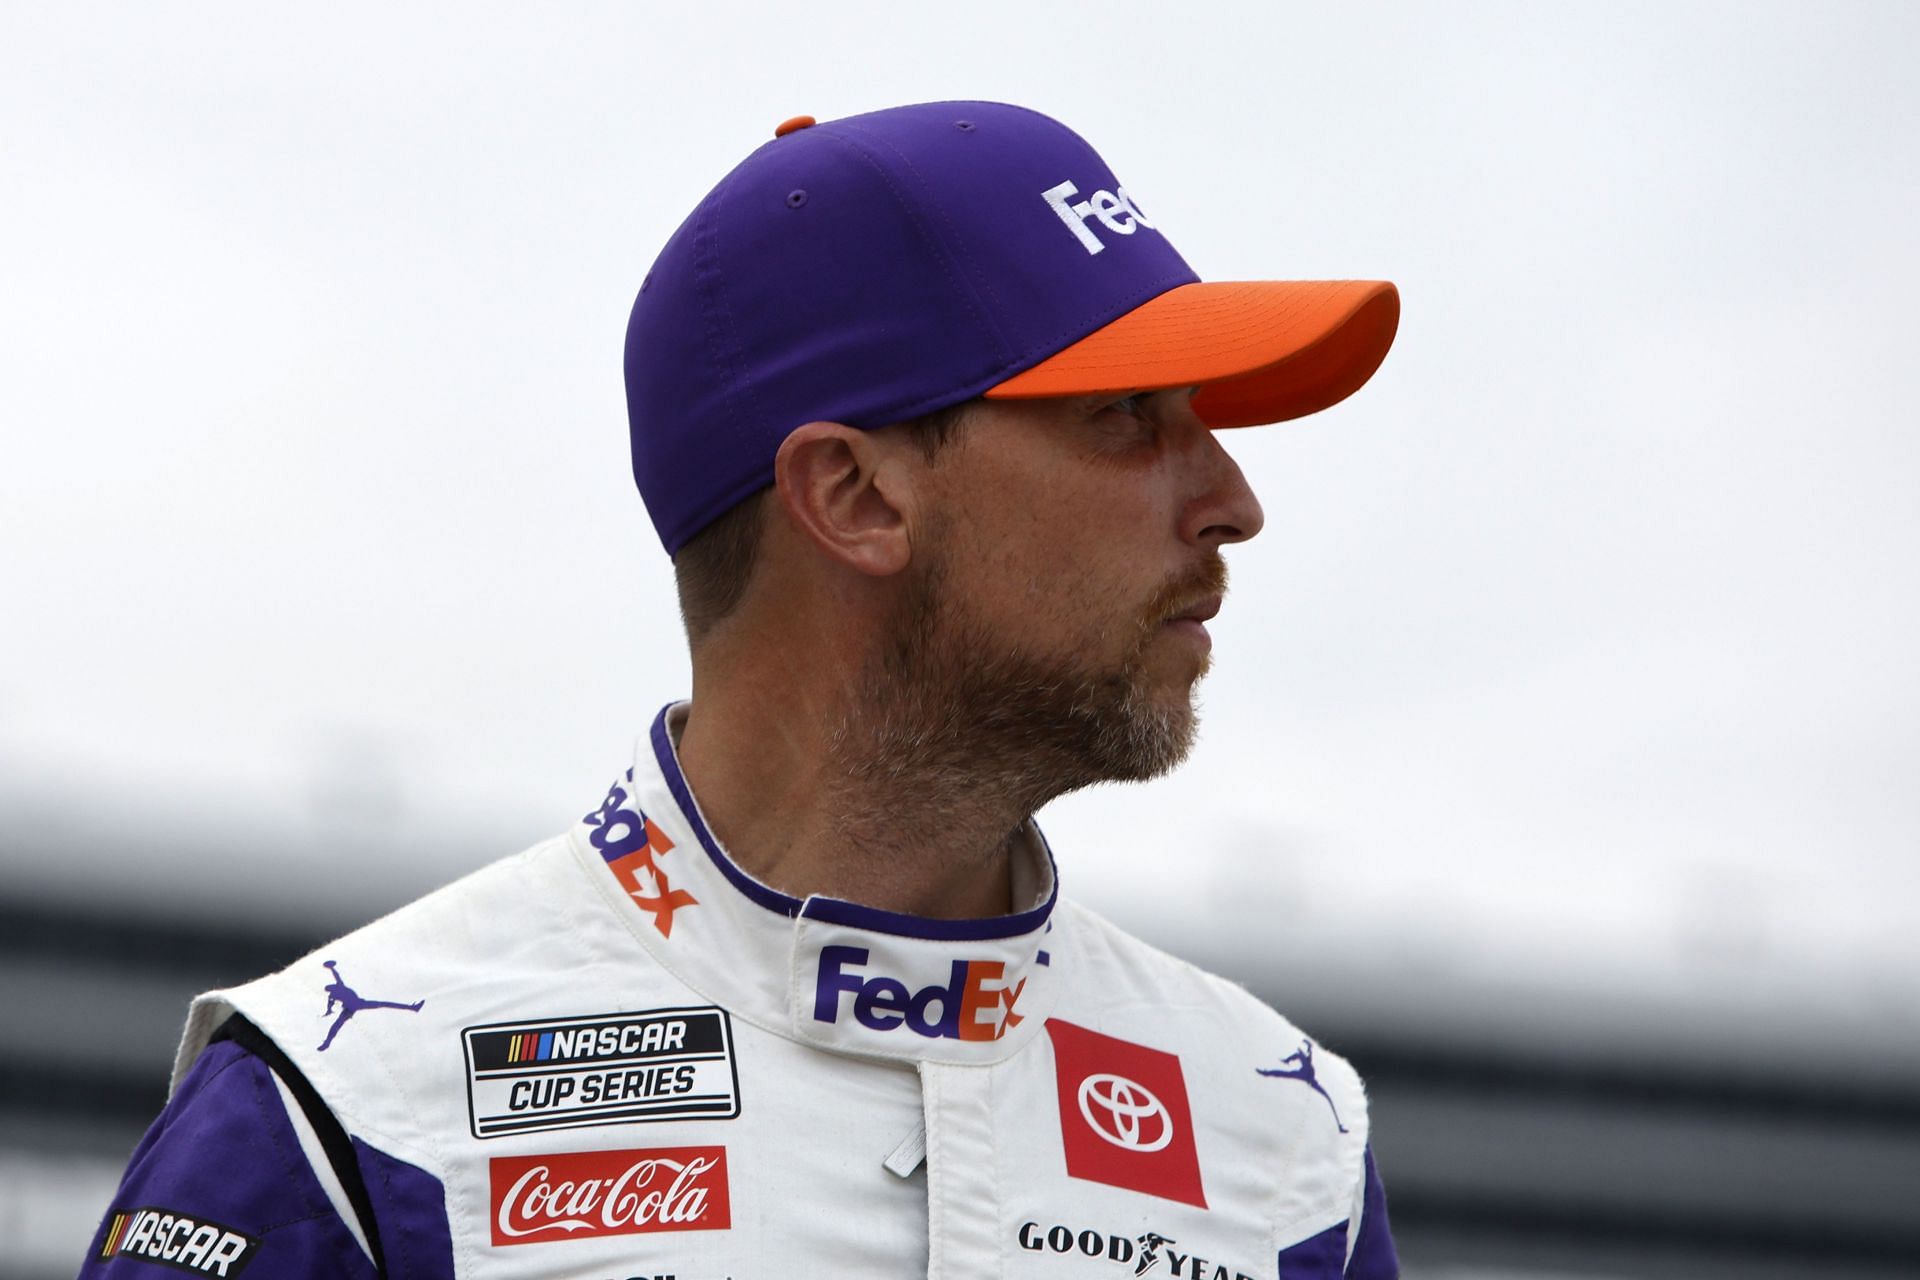 Denny Hamlin looks on during the elimination bracket qualifying for the NASCAR Cup Series All-Star Race at Texas Motor Speedway. (Photo by Sean Gardner/Getty Images)